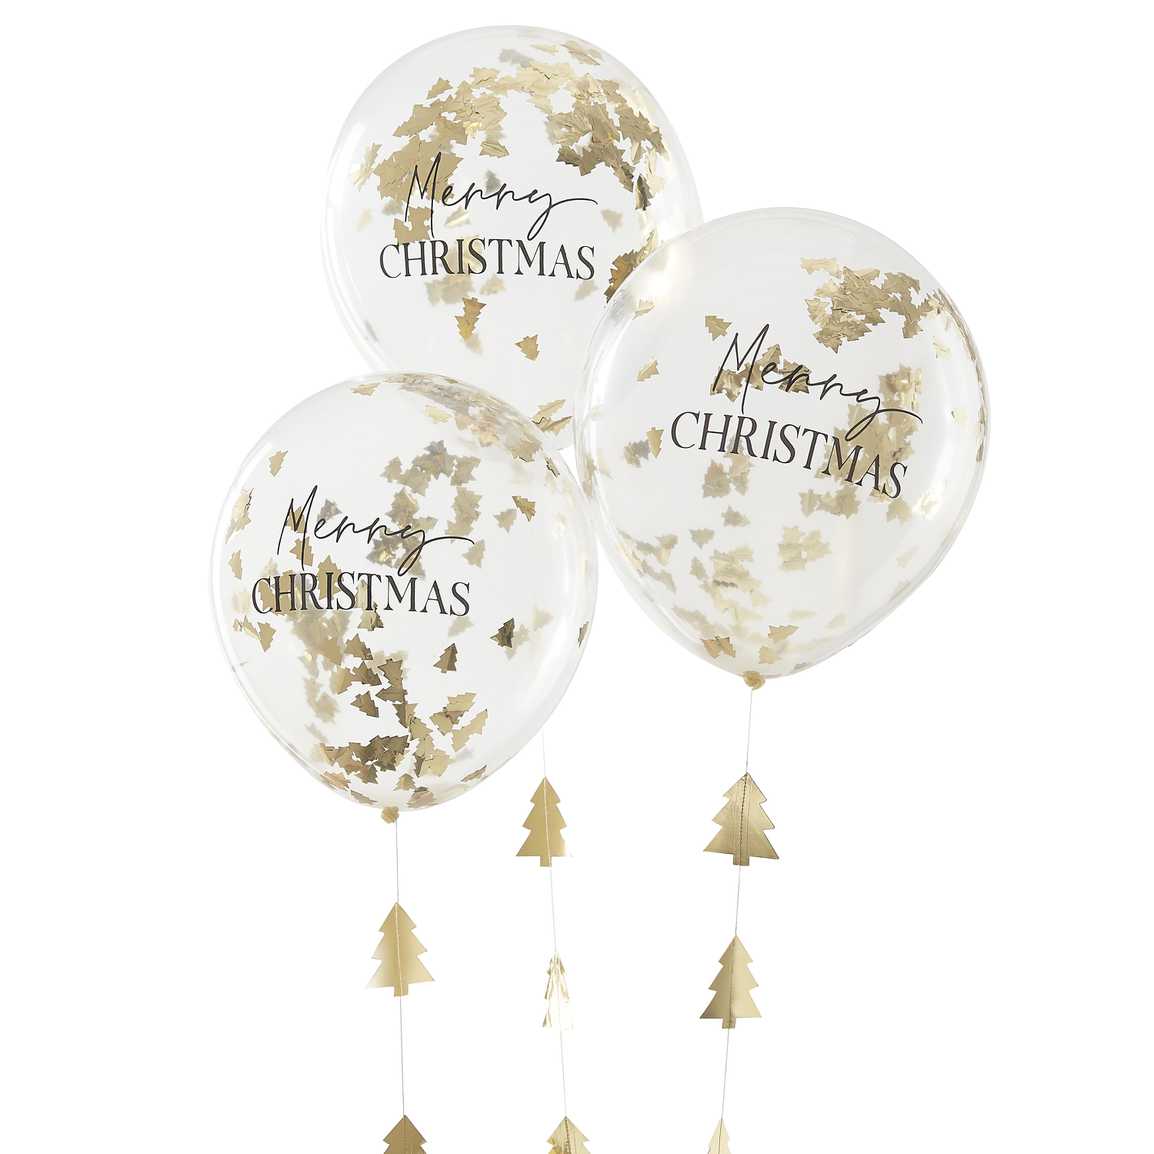 Merry Christmas Confetti Balloons with Gold Christmas Tree Balloon Tails